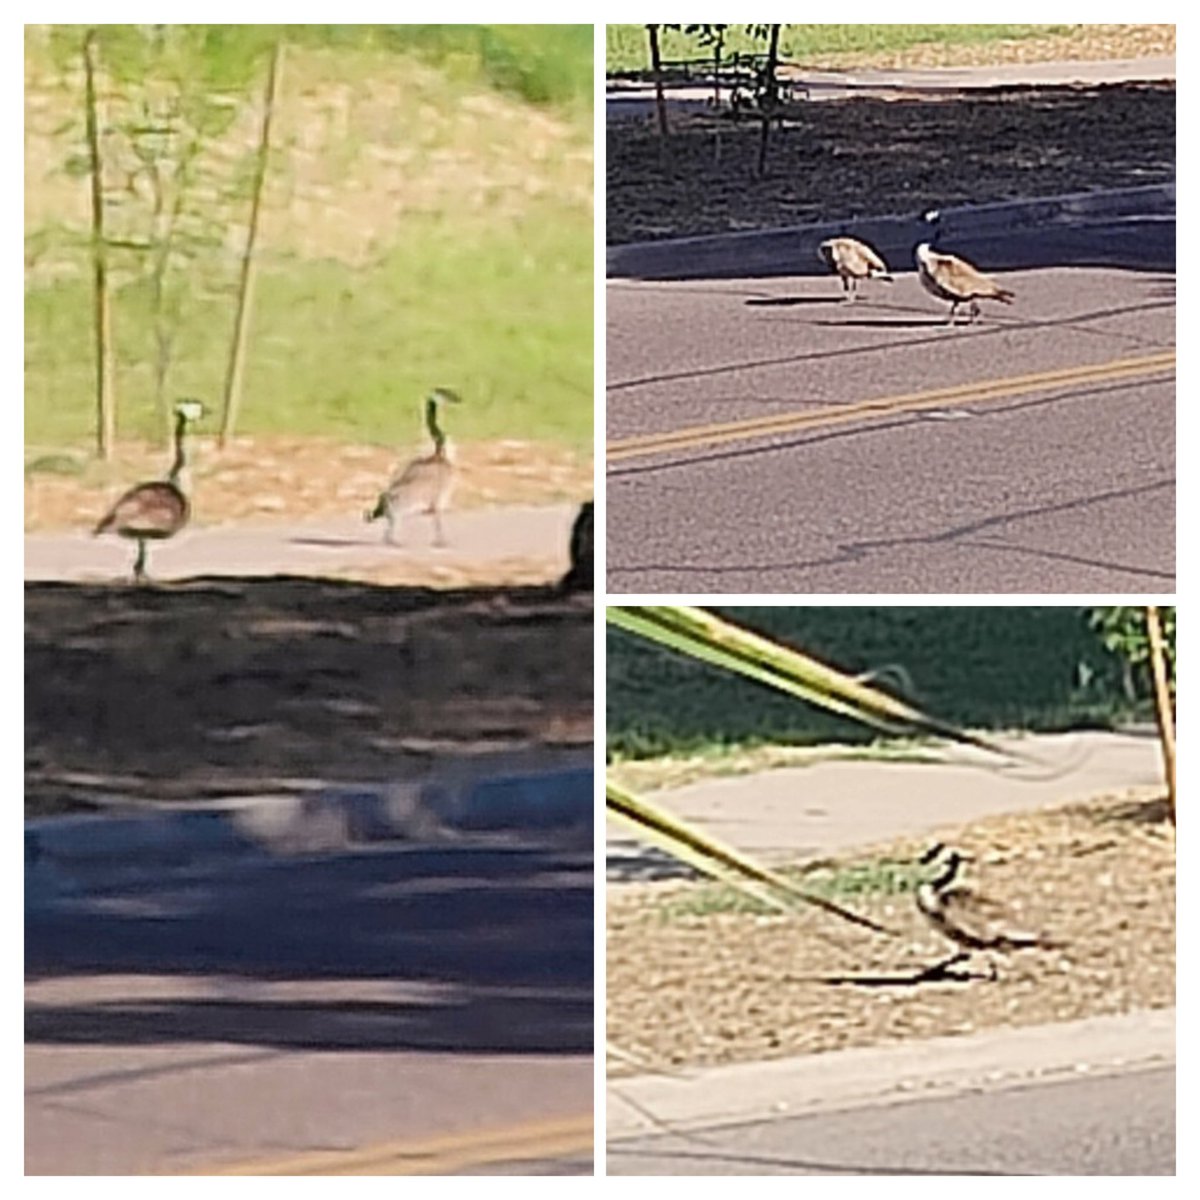 The Canadienne #FoieGras that was stalking me in the parking lot on Monday has apparently figured out where my balcony is.

Just two #geese, casually strolling down 42nd, not a single feathered fuck to give.

#birdwatching #birdavoiding #TippiHedrenHell